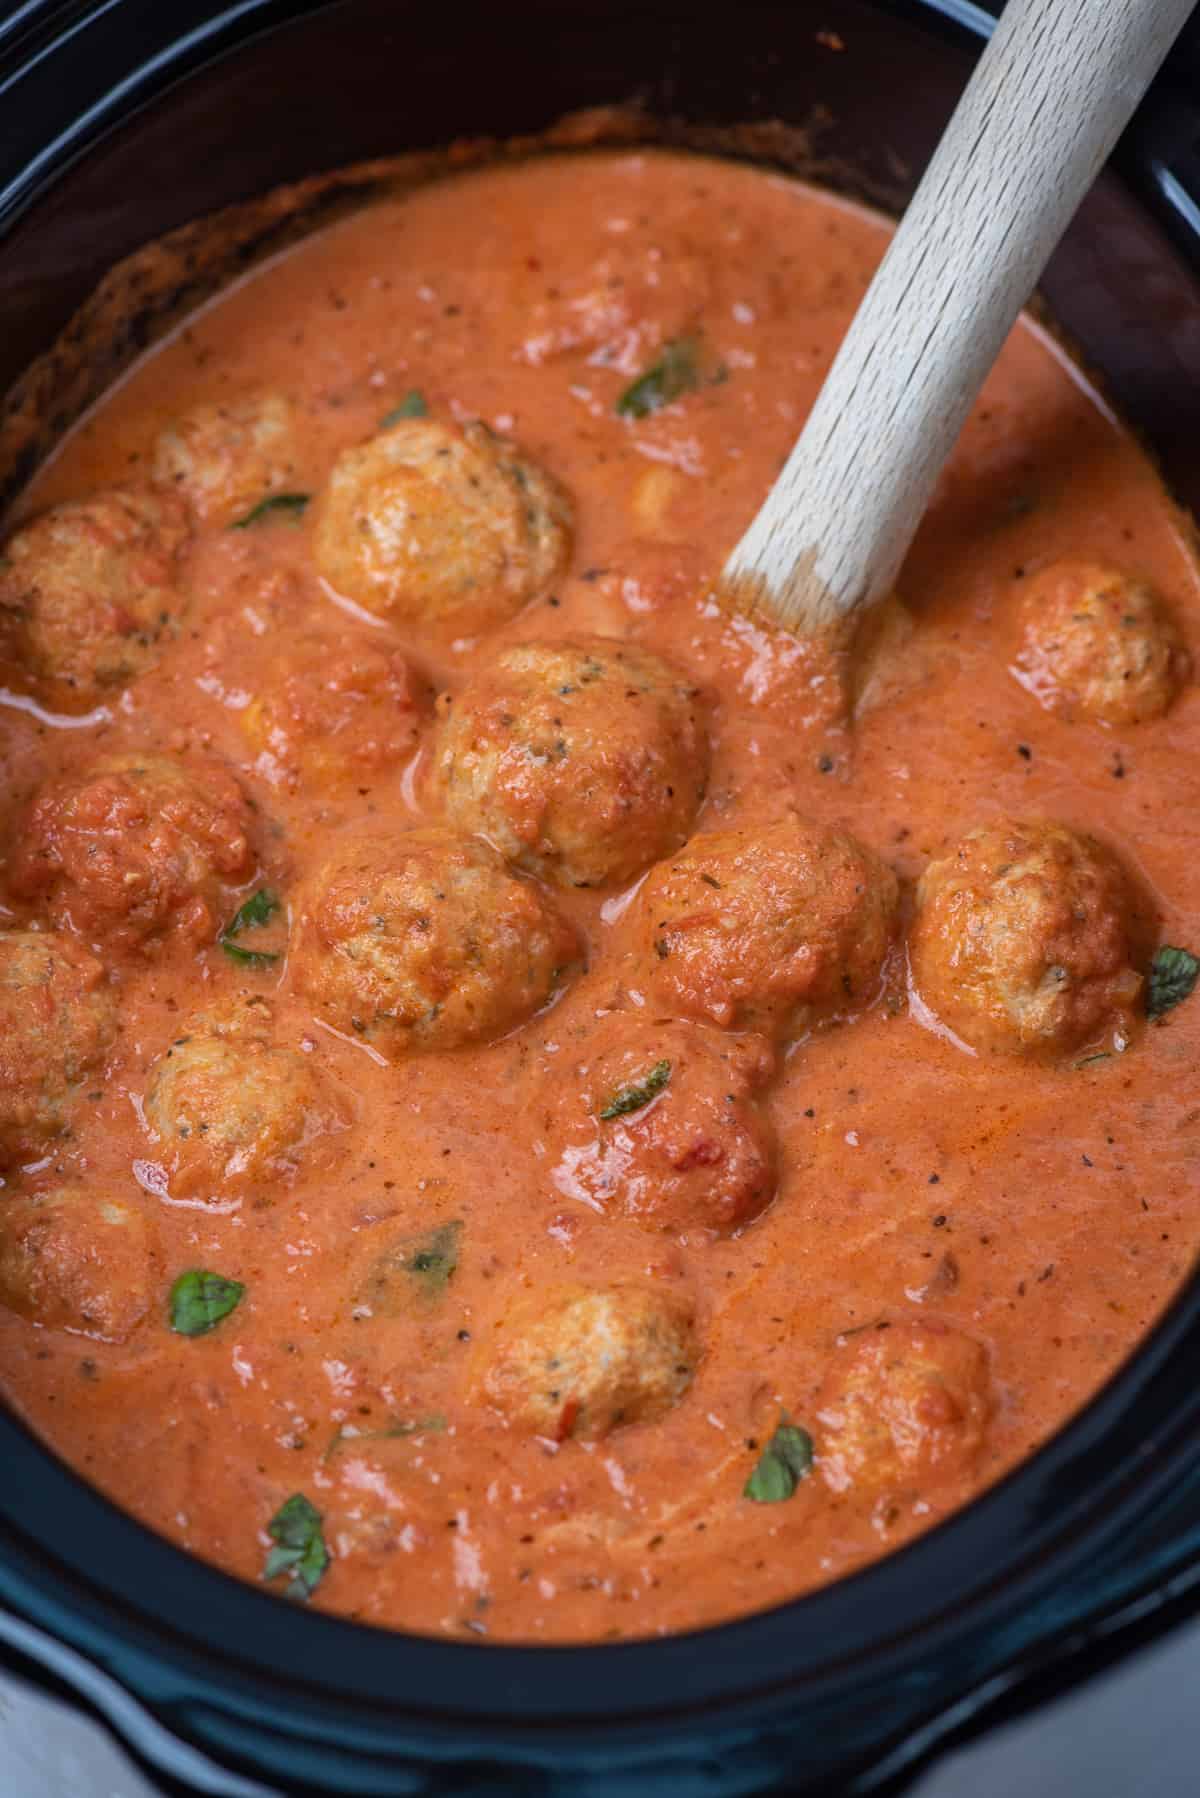 A wooden spoon resting in a slow cooker filled with chicken meatballs in tomato cream sauce.